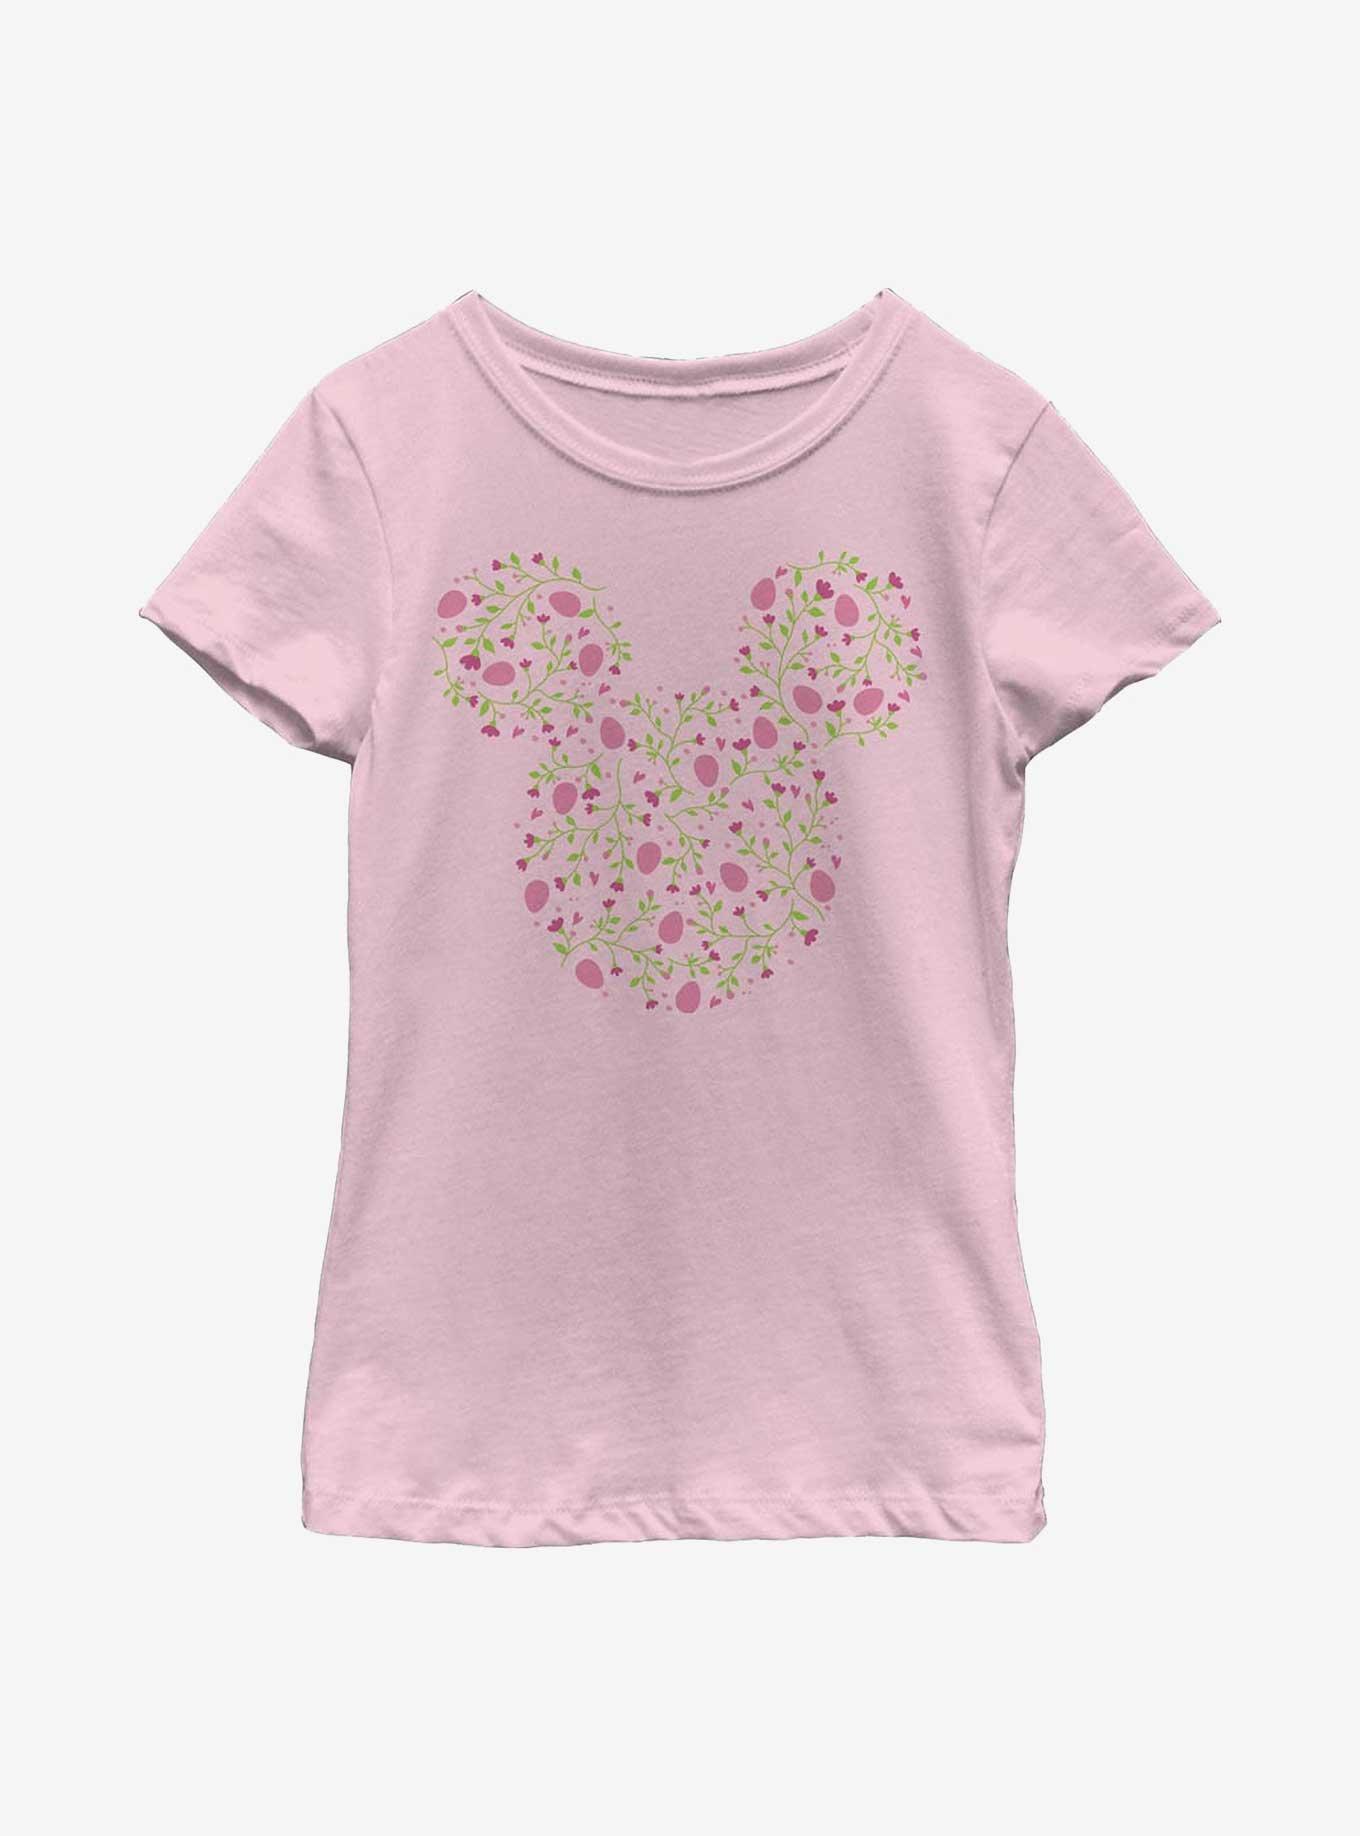 Disney Mickey Mouse Shabby Chic Egg Youth Girls T-Shirt, PINK, hi-res